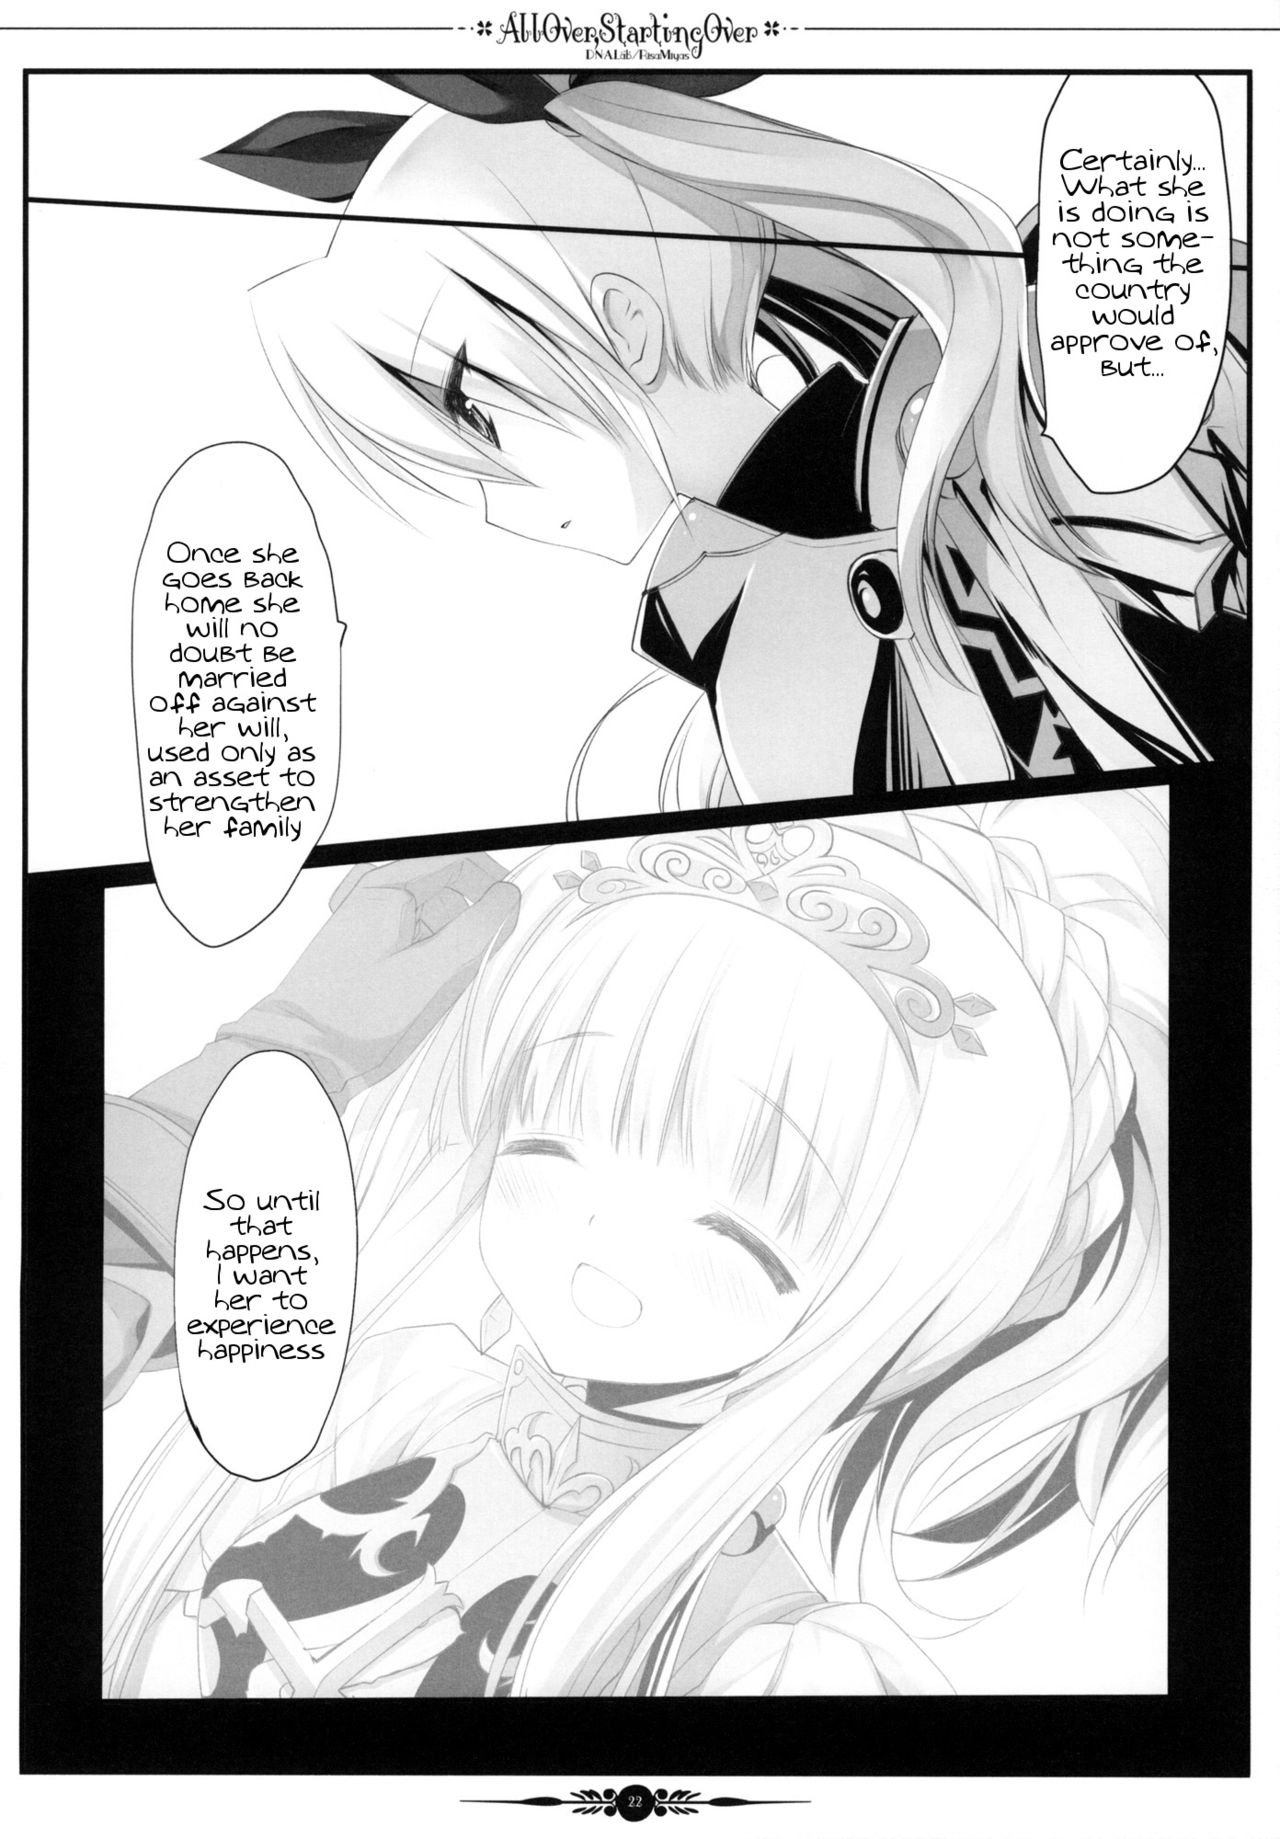 (COMIC1☆4) [D･N･A.Lab. (ミヤスリサ)] All Over, Starting Over (世界樹の迷宮III) [英訳]